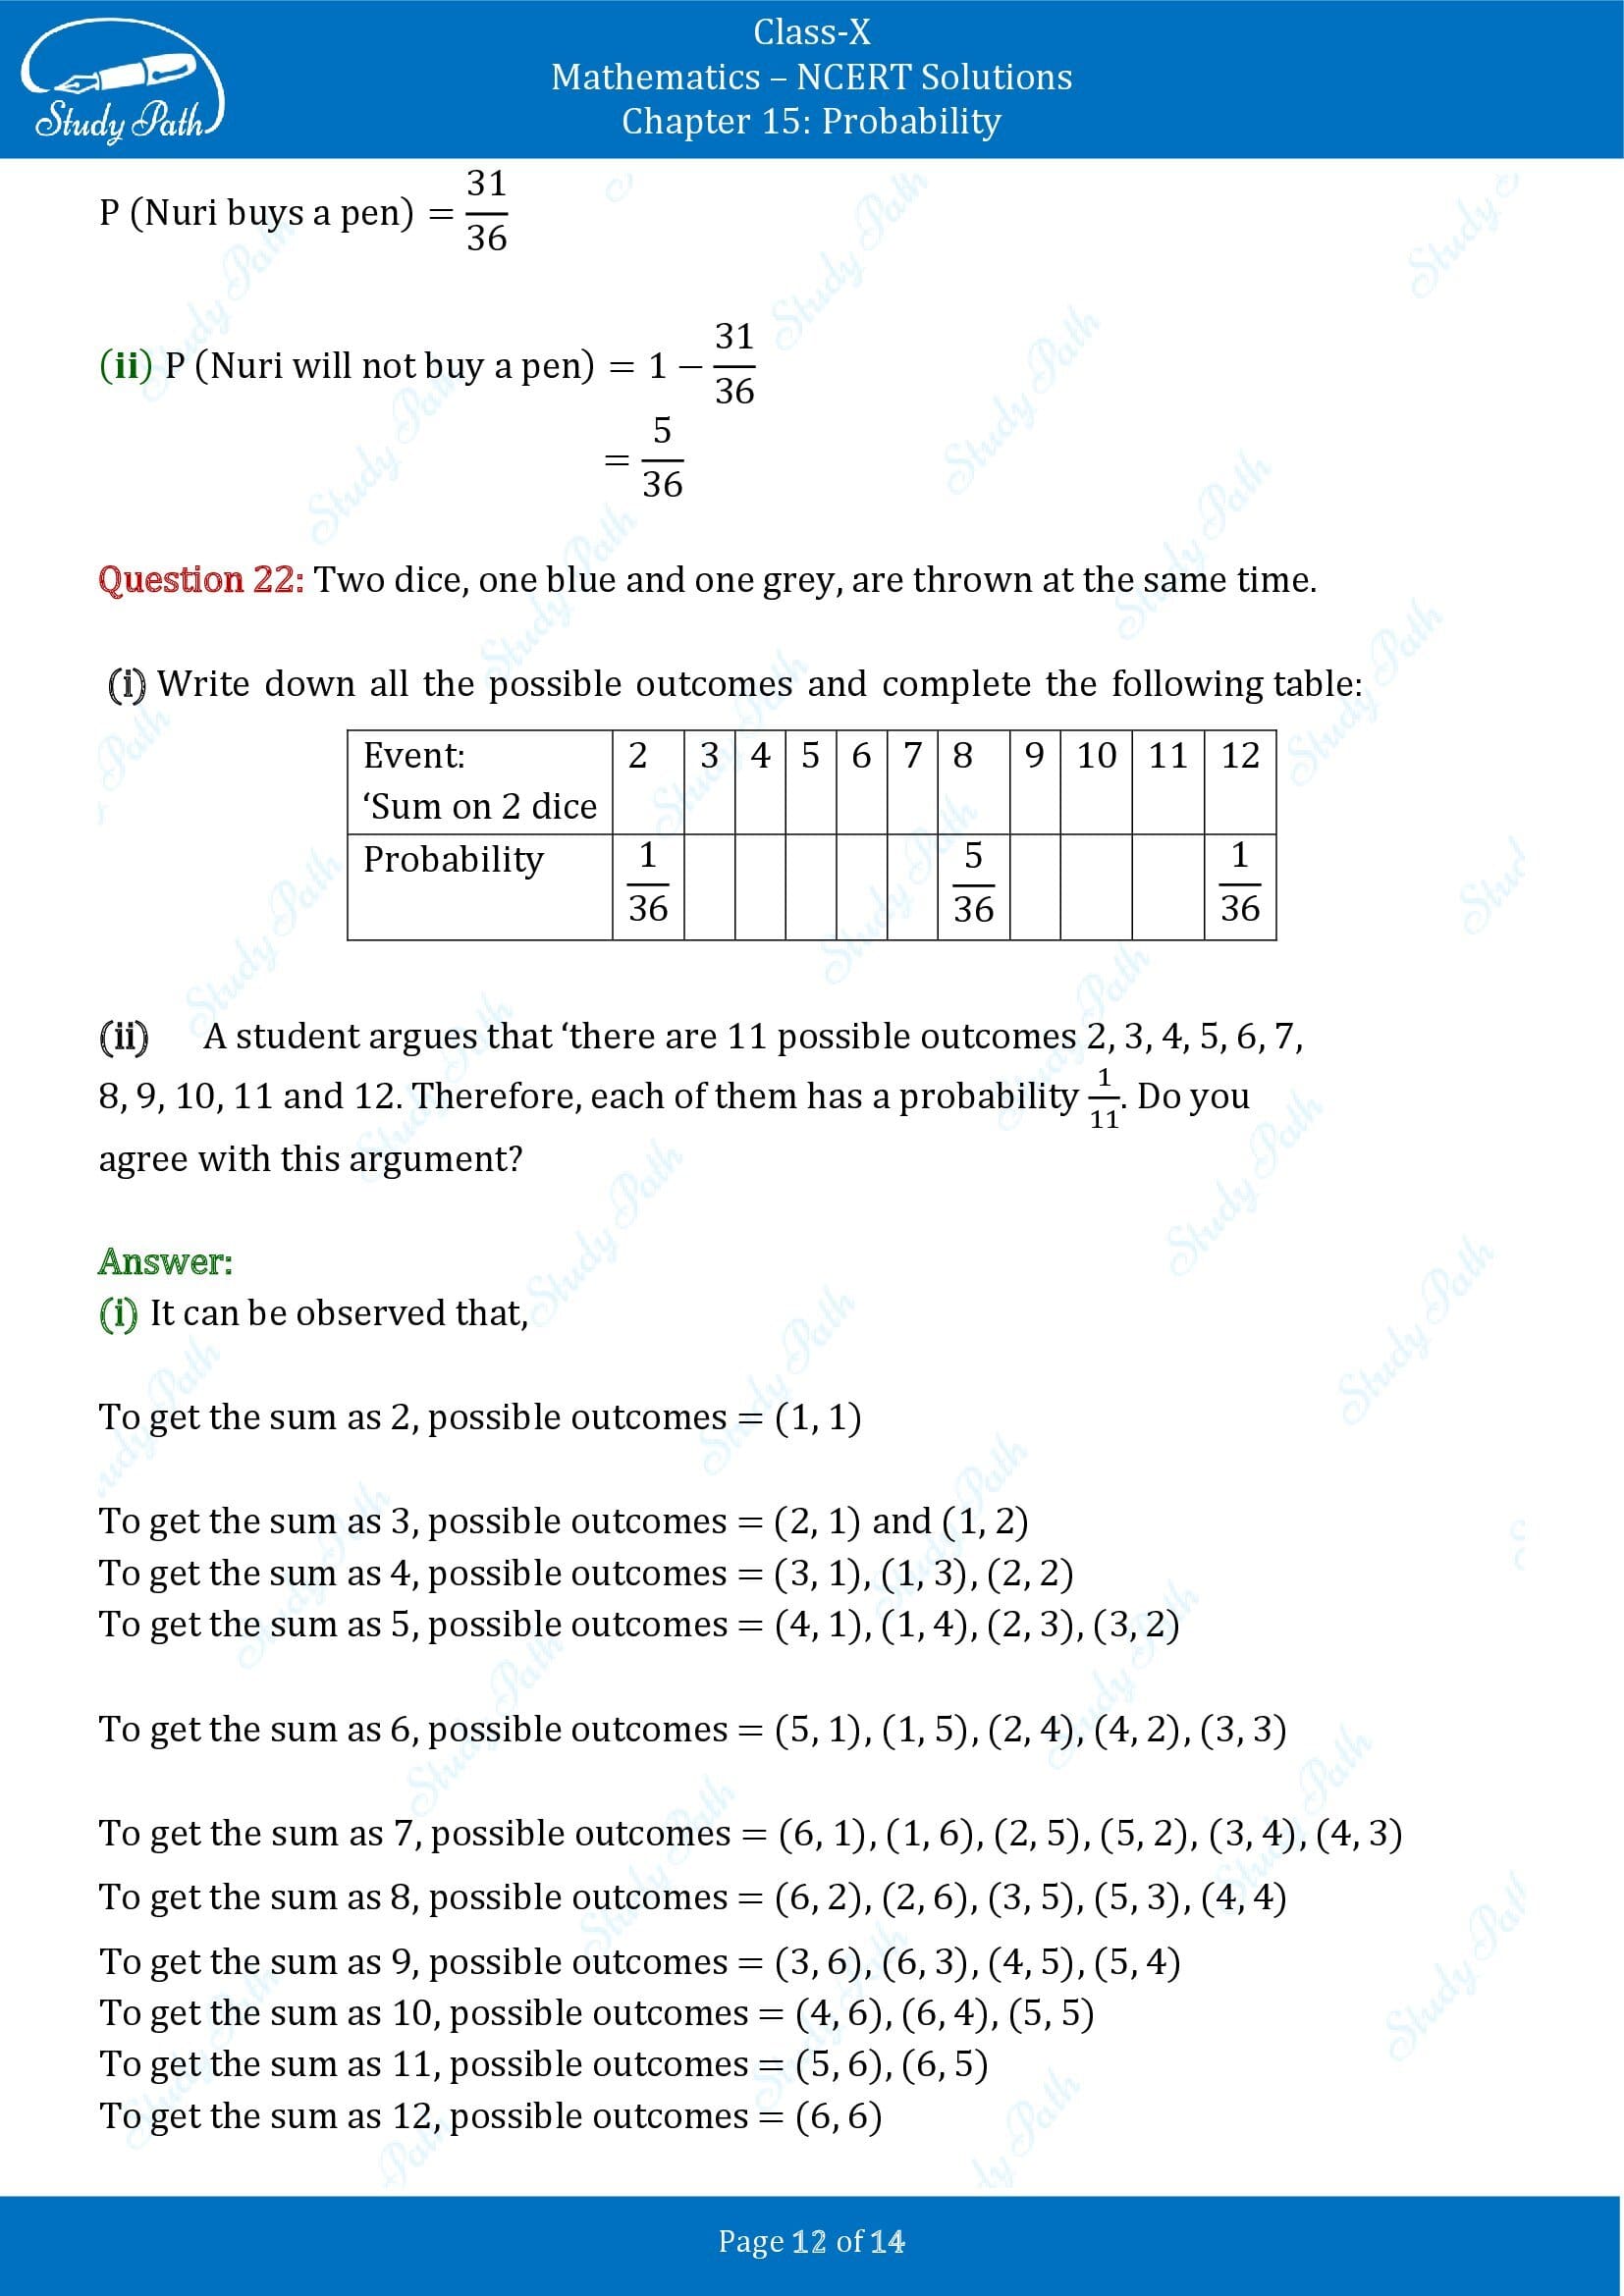 NCERT Solutions for Class 10 Maths Chapter 15 Probability Exercise 15.1 00012